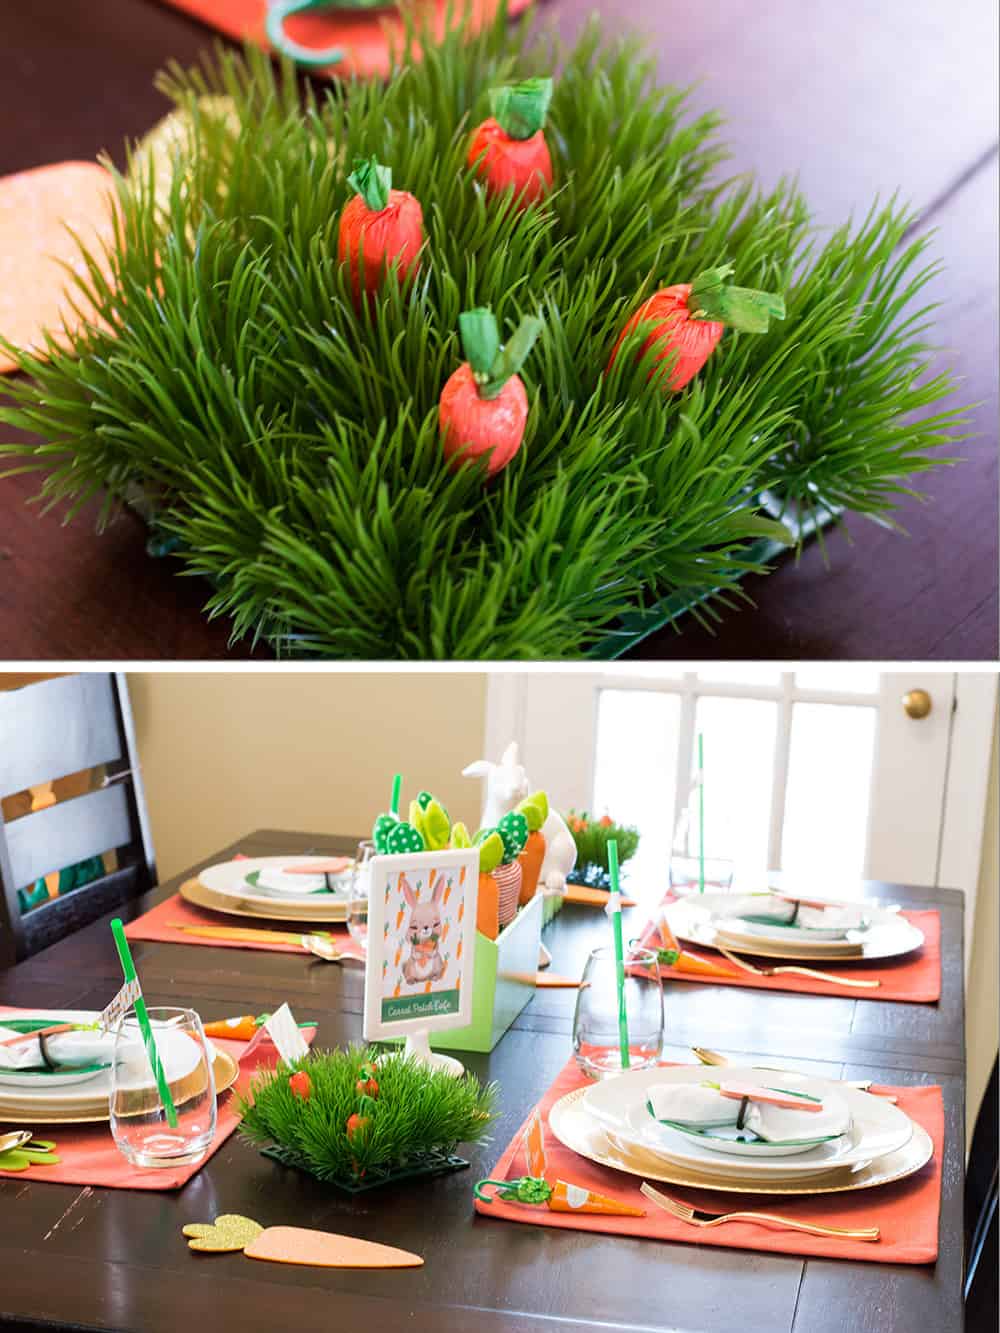 Grass and carrots decoration for Carrot Patch Easter Table